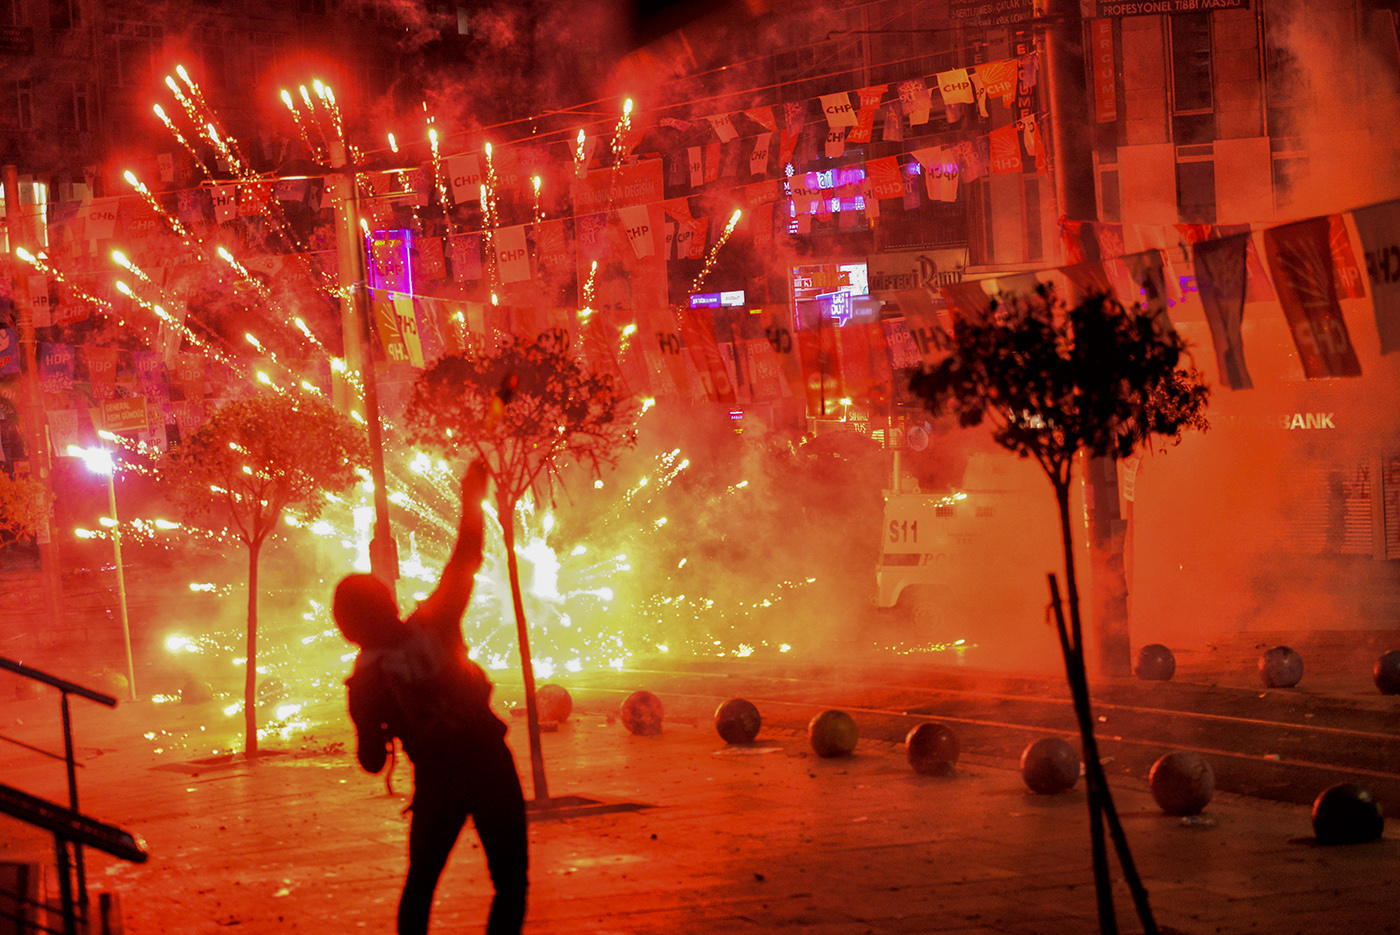 Fireworks thrown by protesters against Turkish riot police explode and illuminate the scene during a demonstration in Istanbul, Turkey, 11 March 2014.